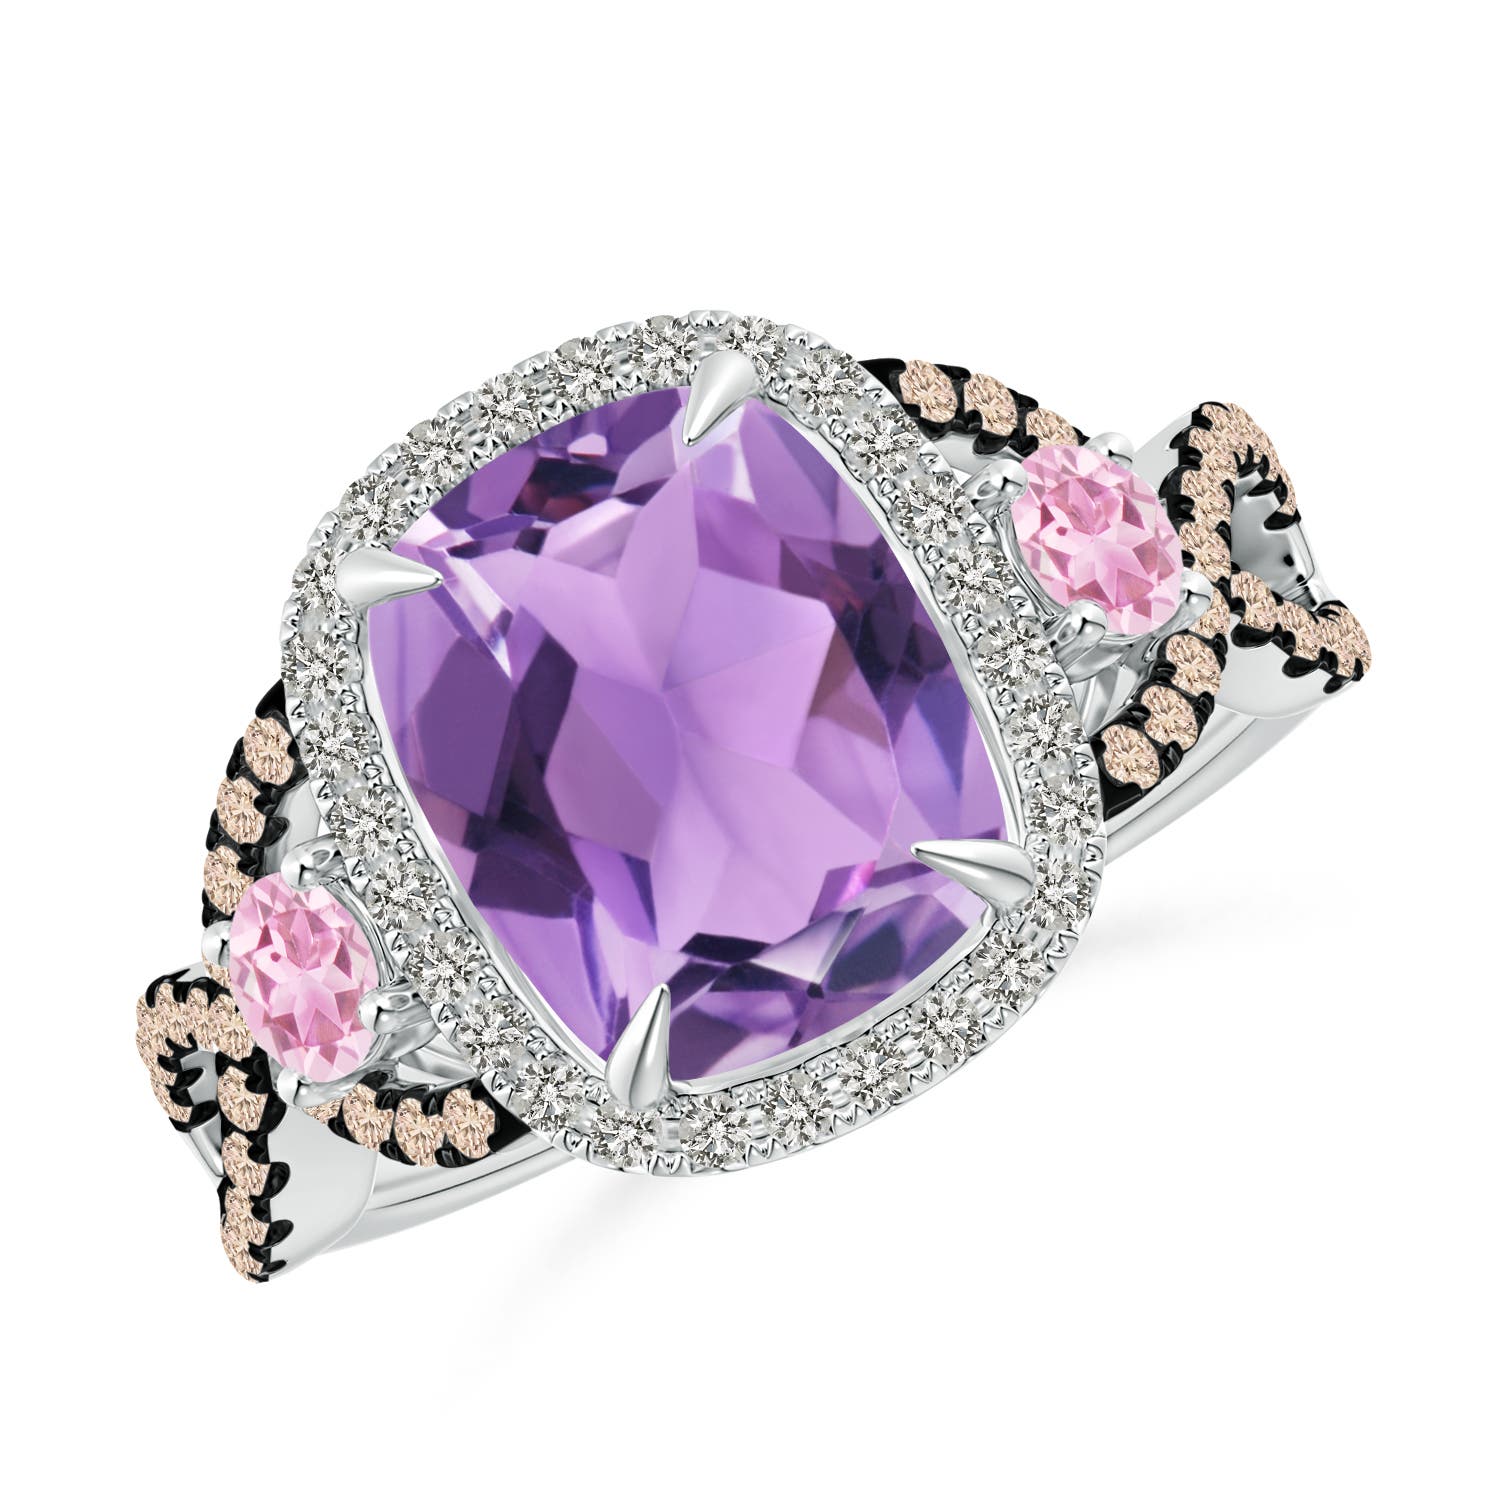 A - Amethyst / 3.39 CT / 14 KT White Gold